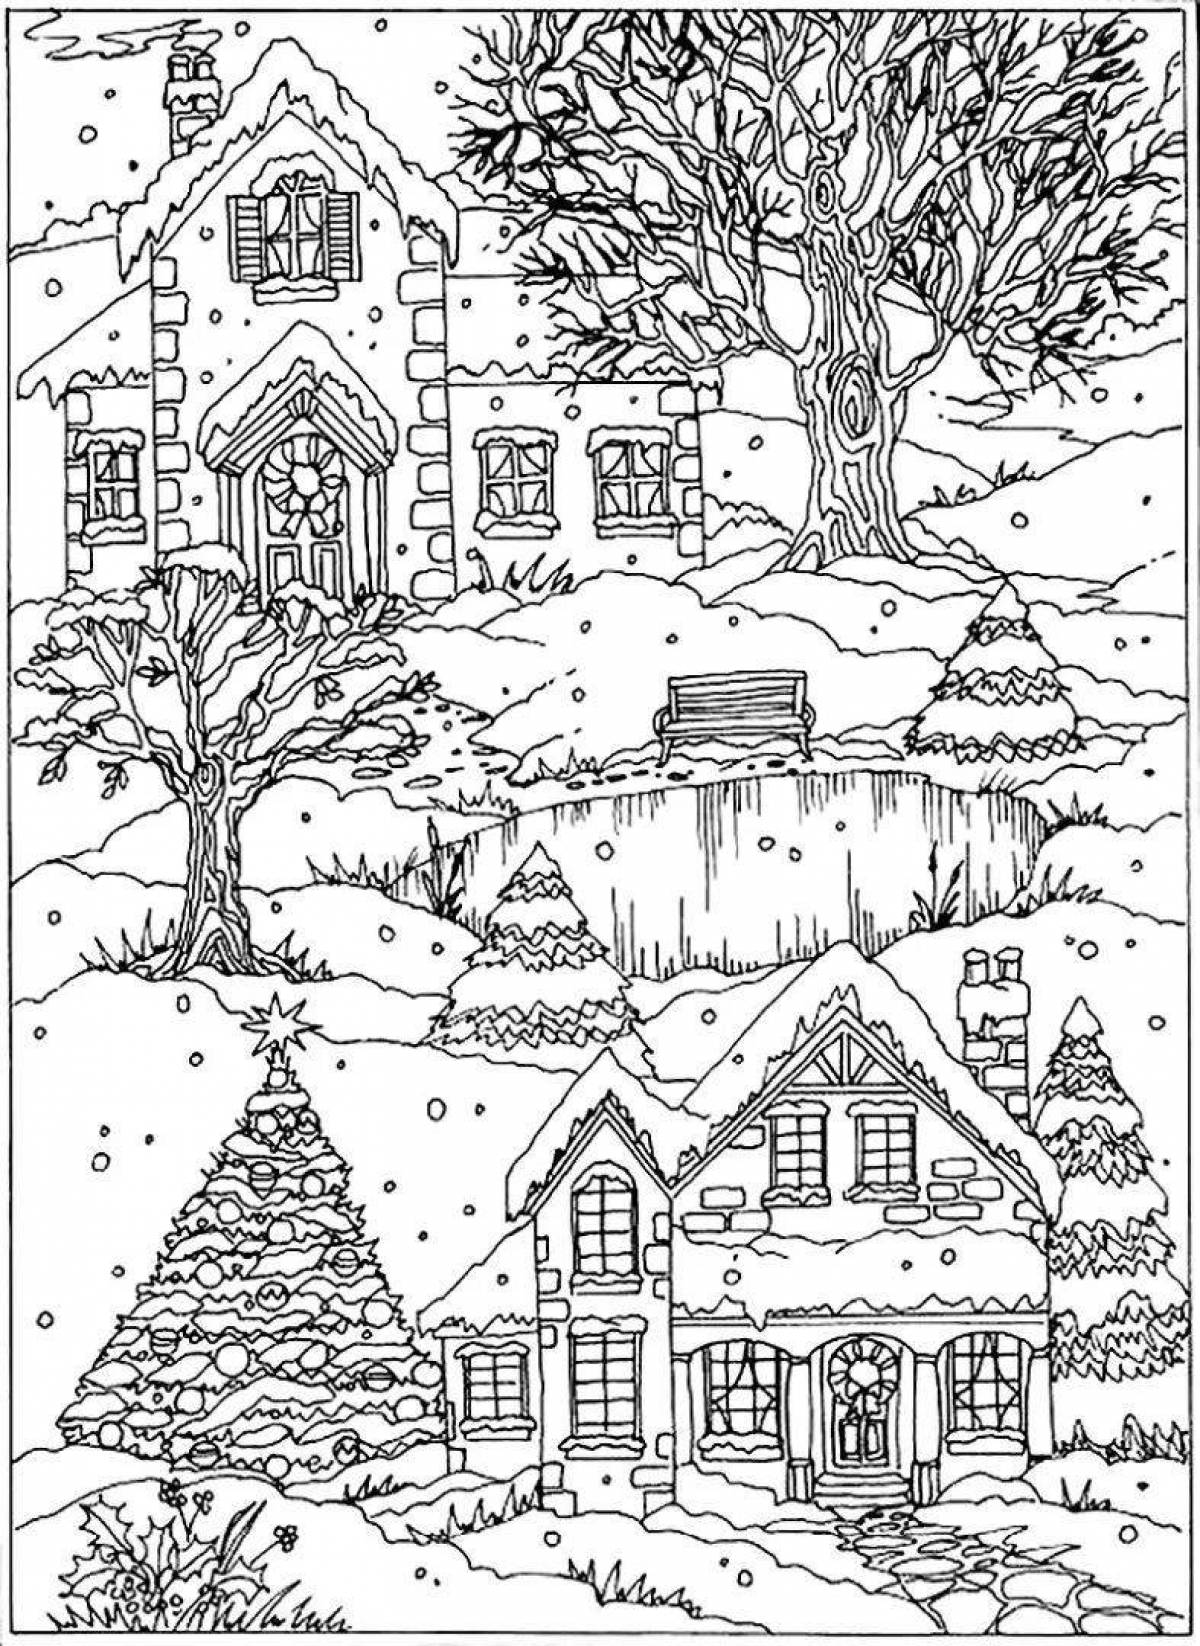 A magical Christmas coloring book for adults